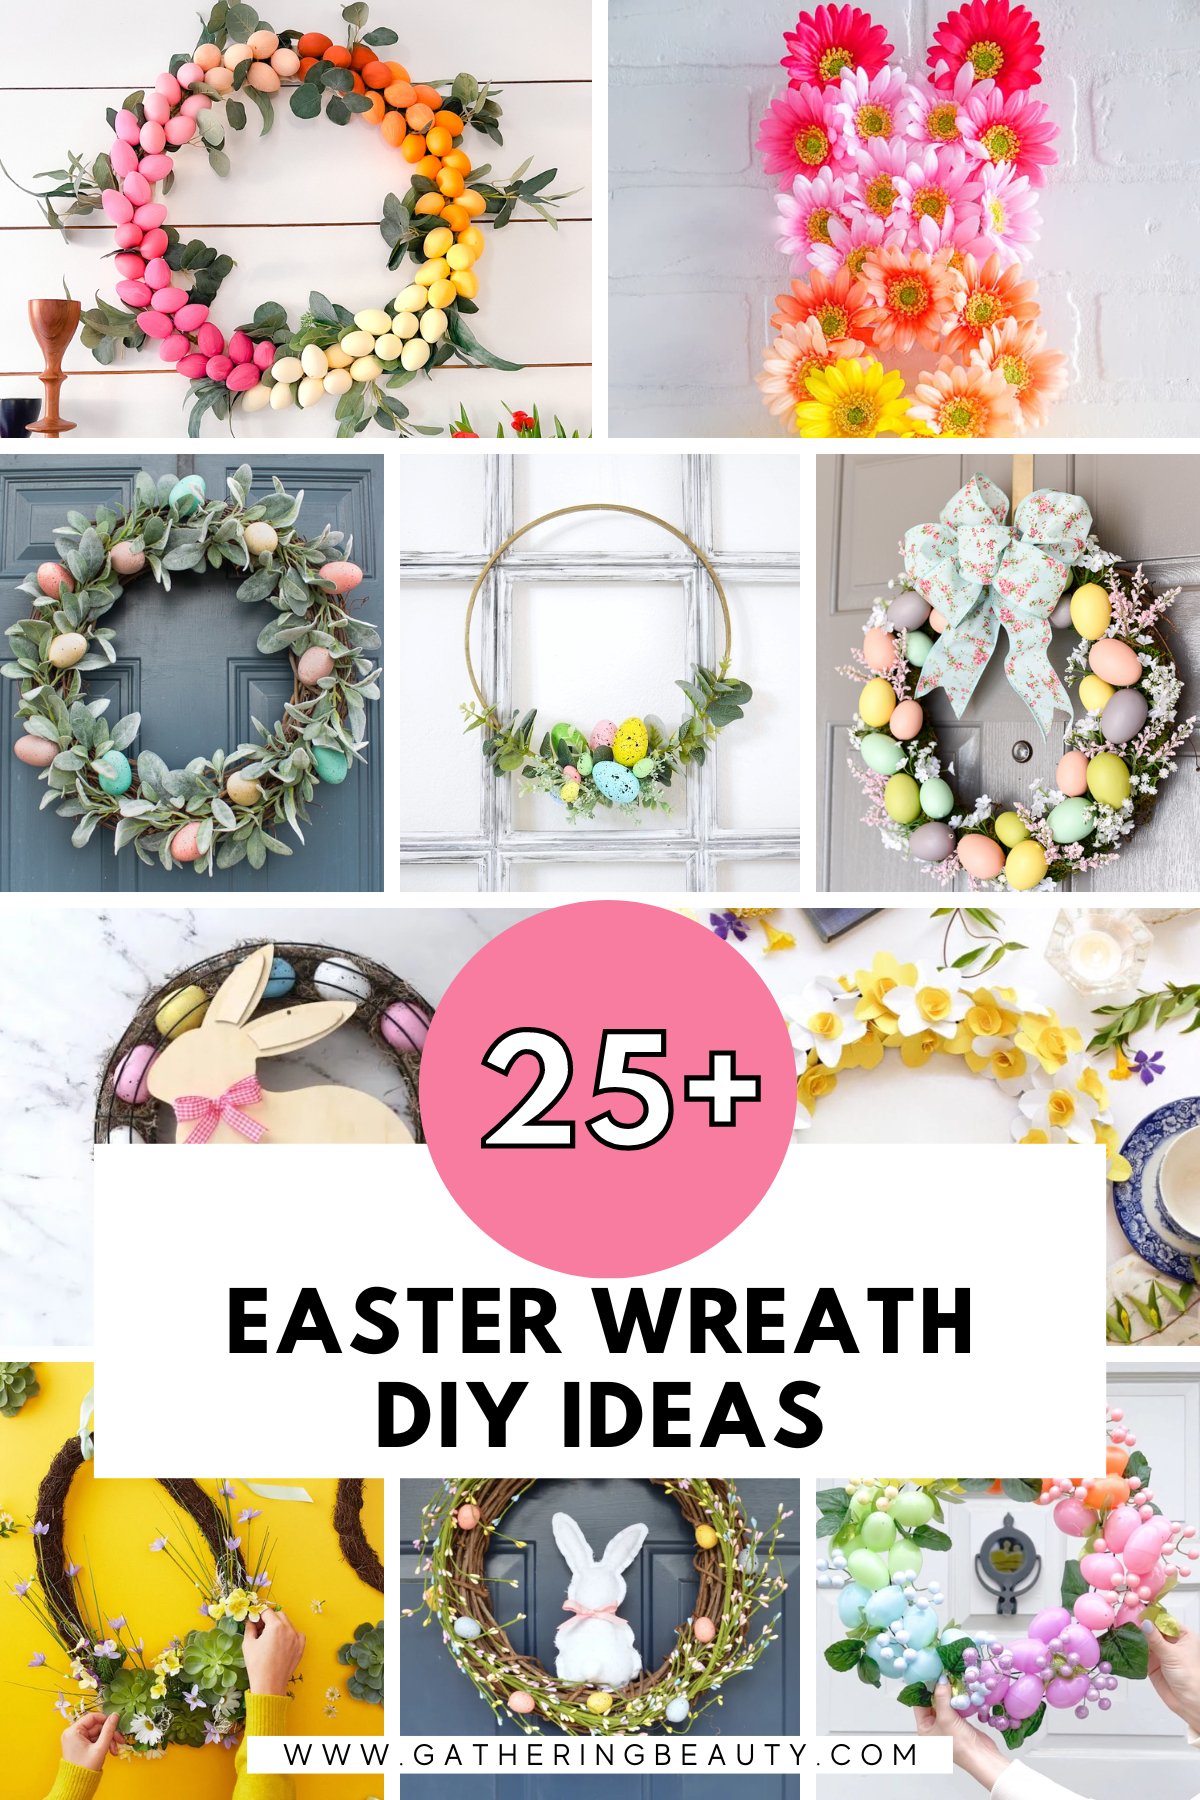 The Cute Spring Decor Items I Have My Eye On Right Now & Chicken